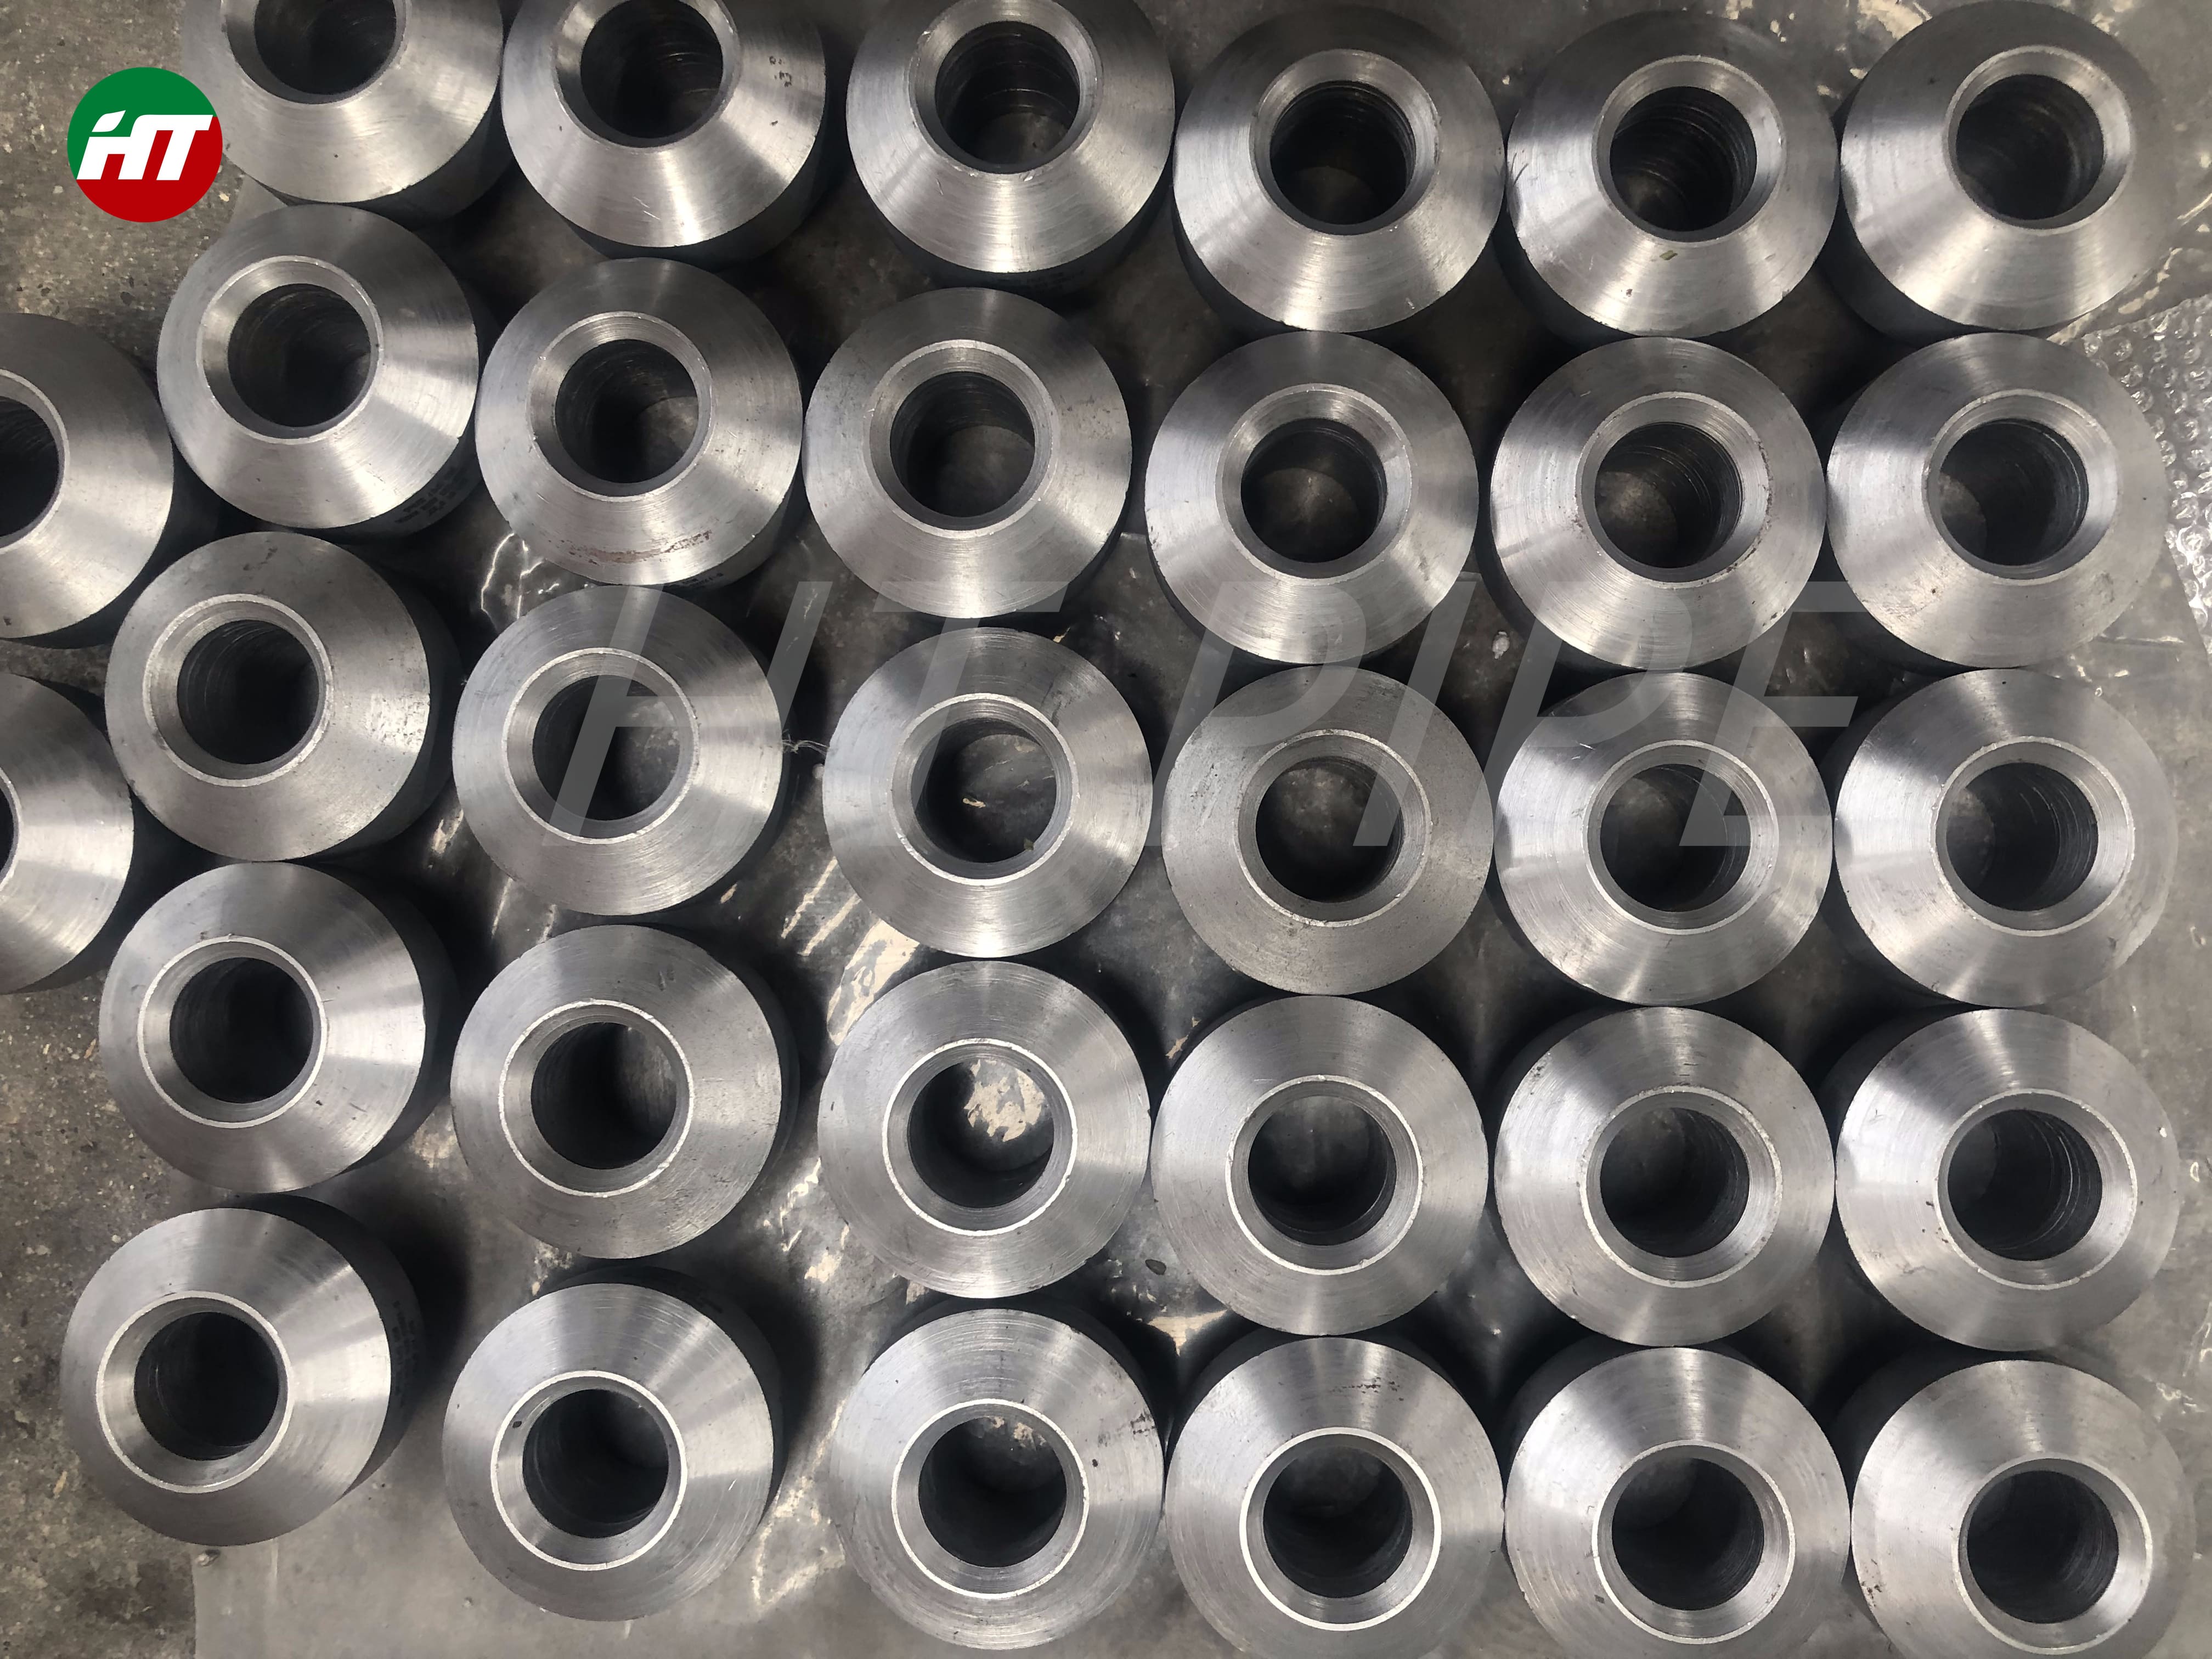 ASTM A105 Pipe Fittings ASME SA105 Elbow And Tee Pressure Rating